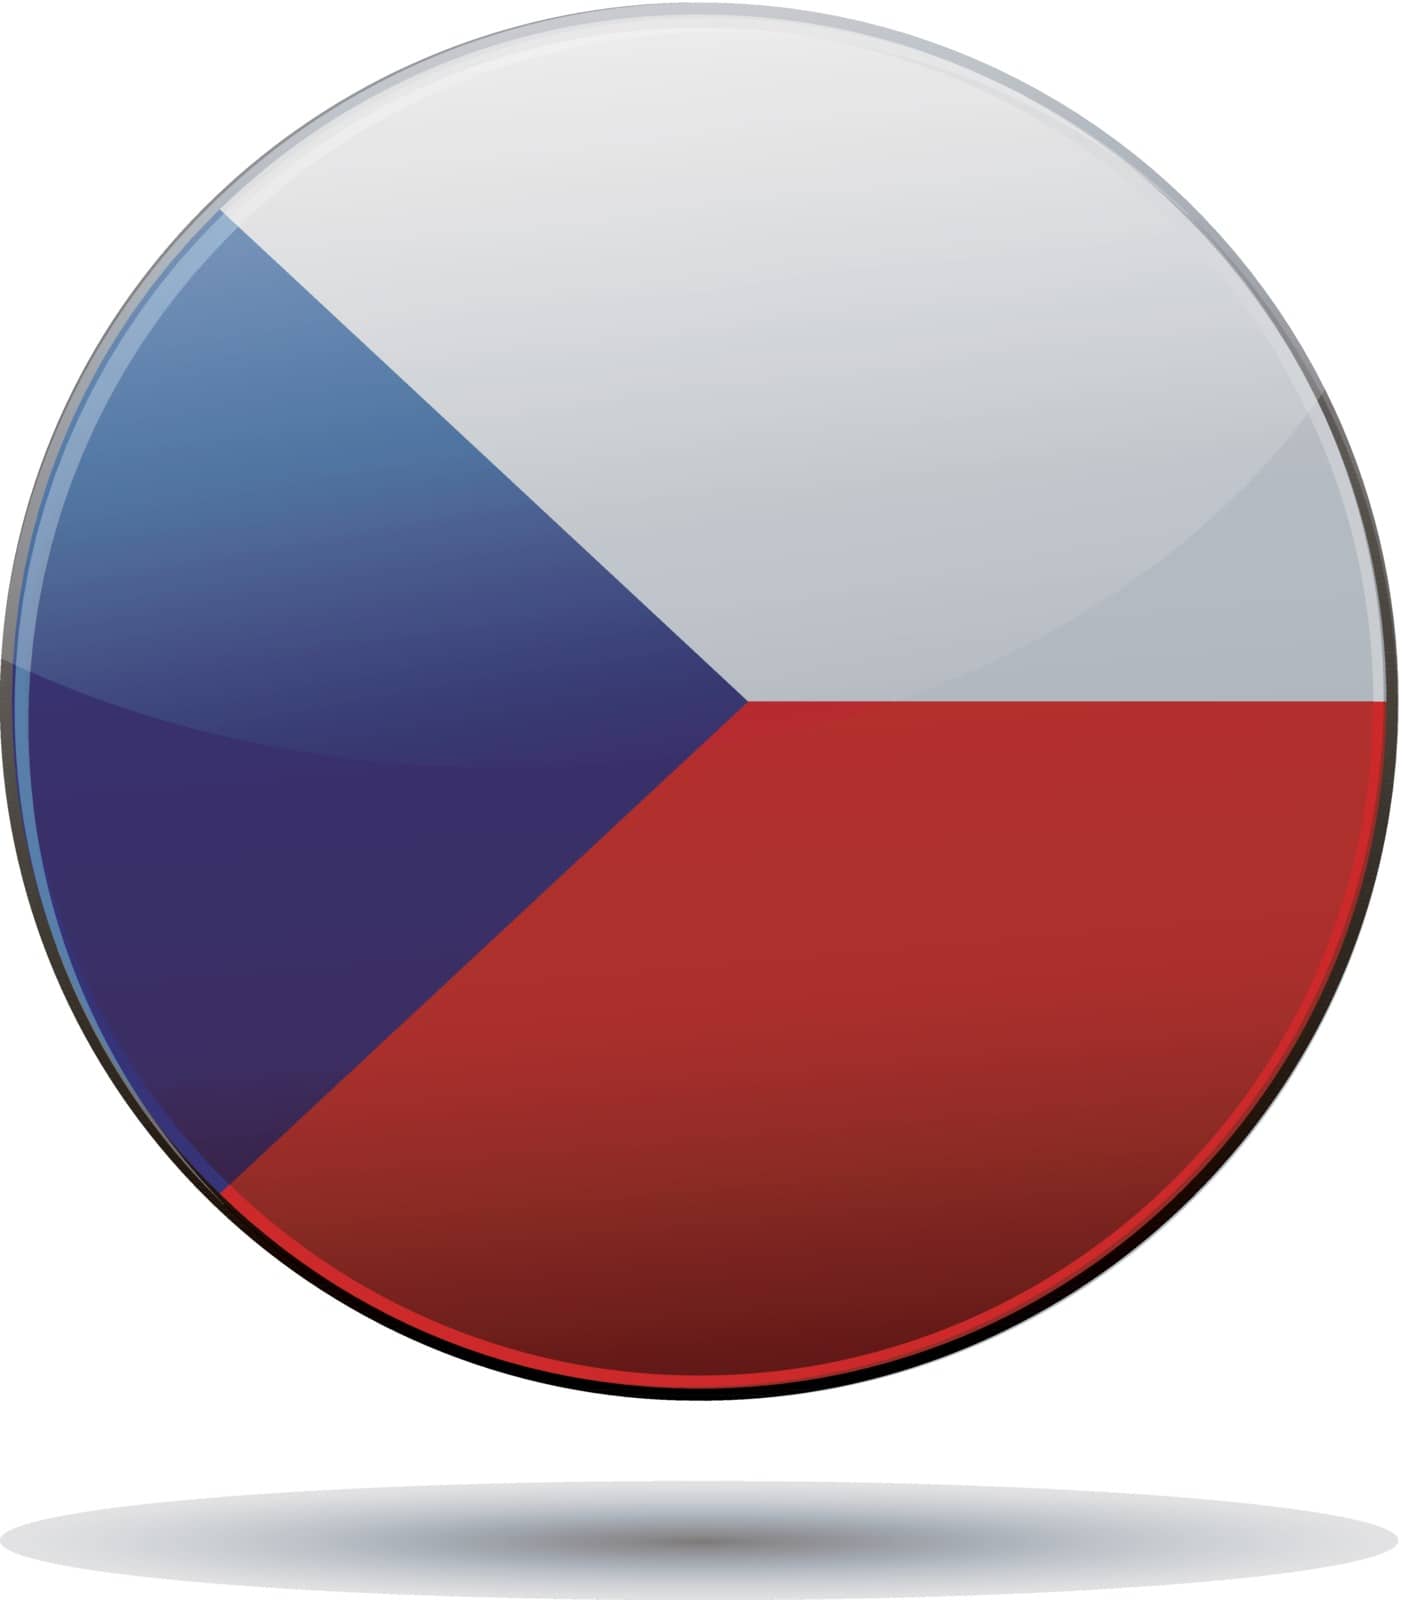 Czech republic flag button with reflection and shadow. Isolated glossy flag.